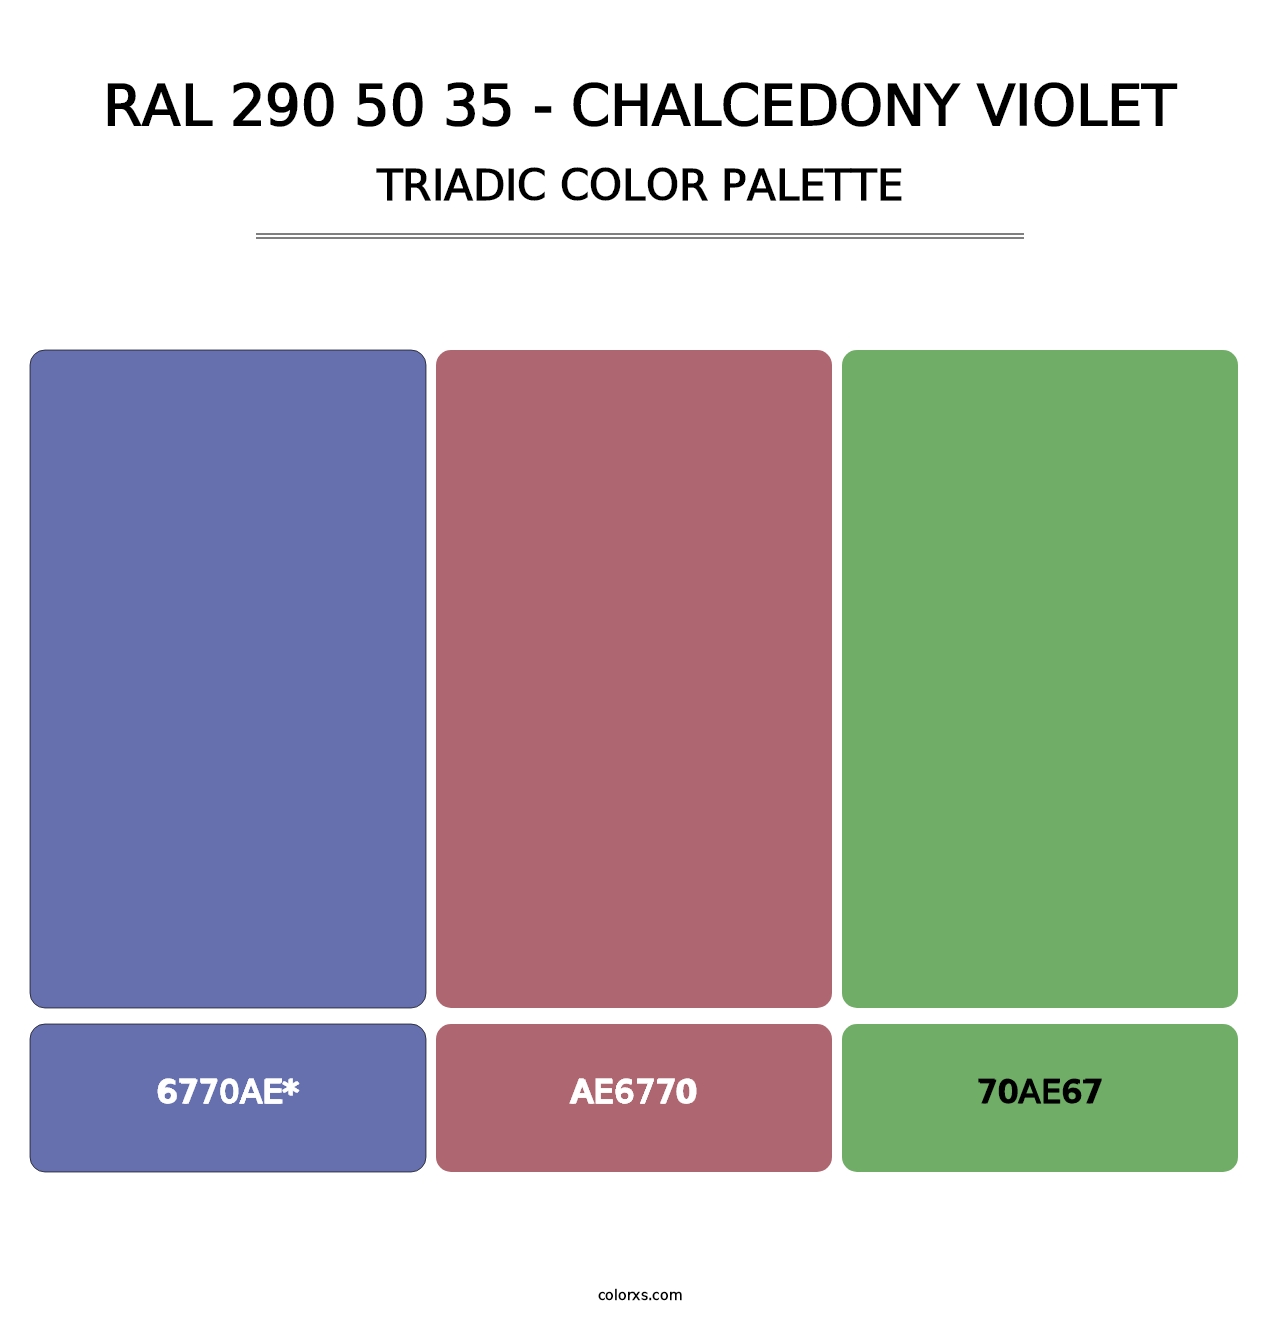 RAL 290 50 35 - Chalcedony Violet - Triadic Color Palette